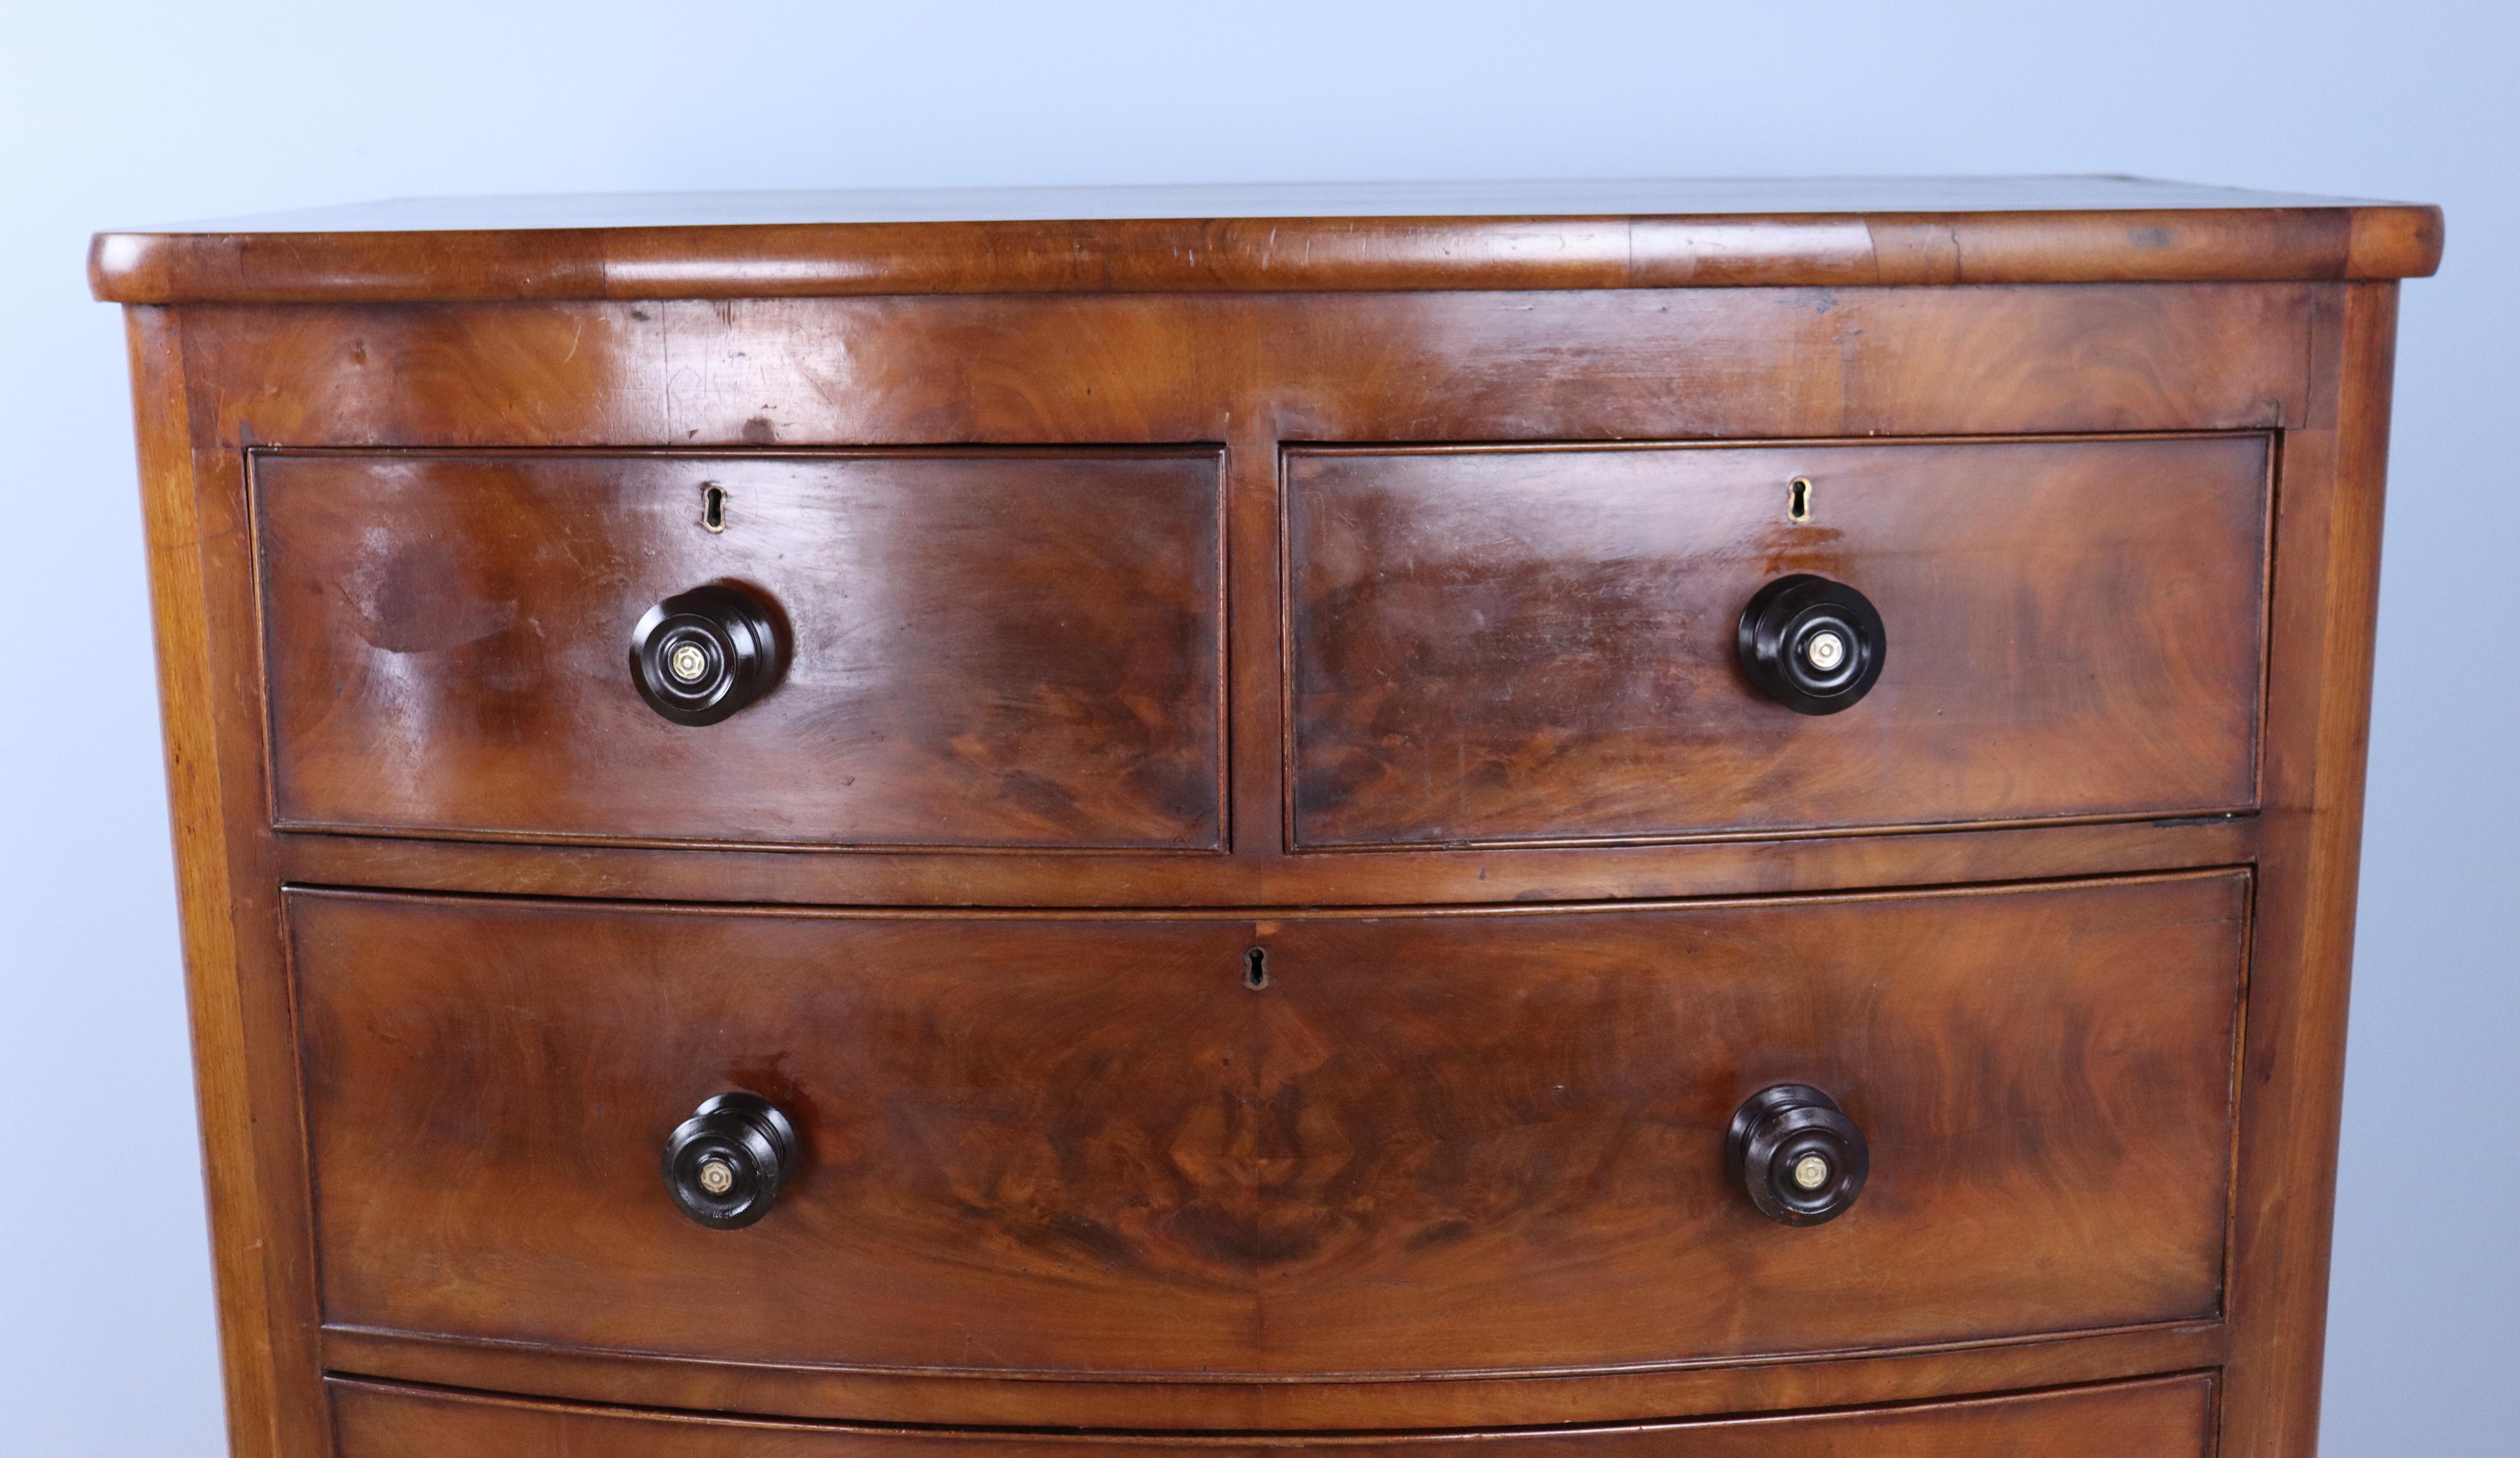 Bookmatched Veneered Bowfront Mahogany Chest of Drawers In Good Condition For Sale In Port Chester, NY